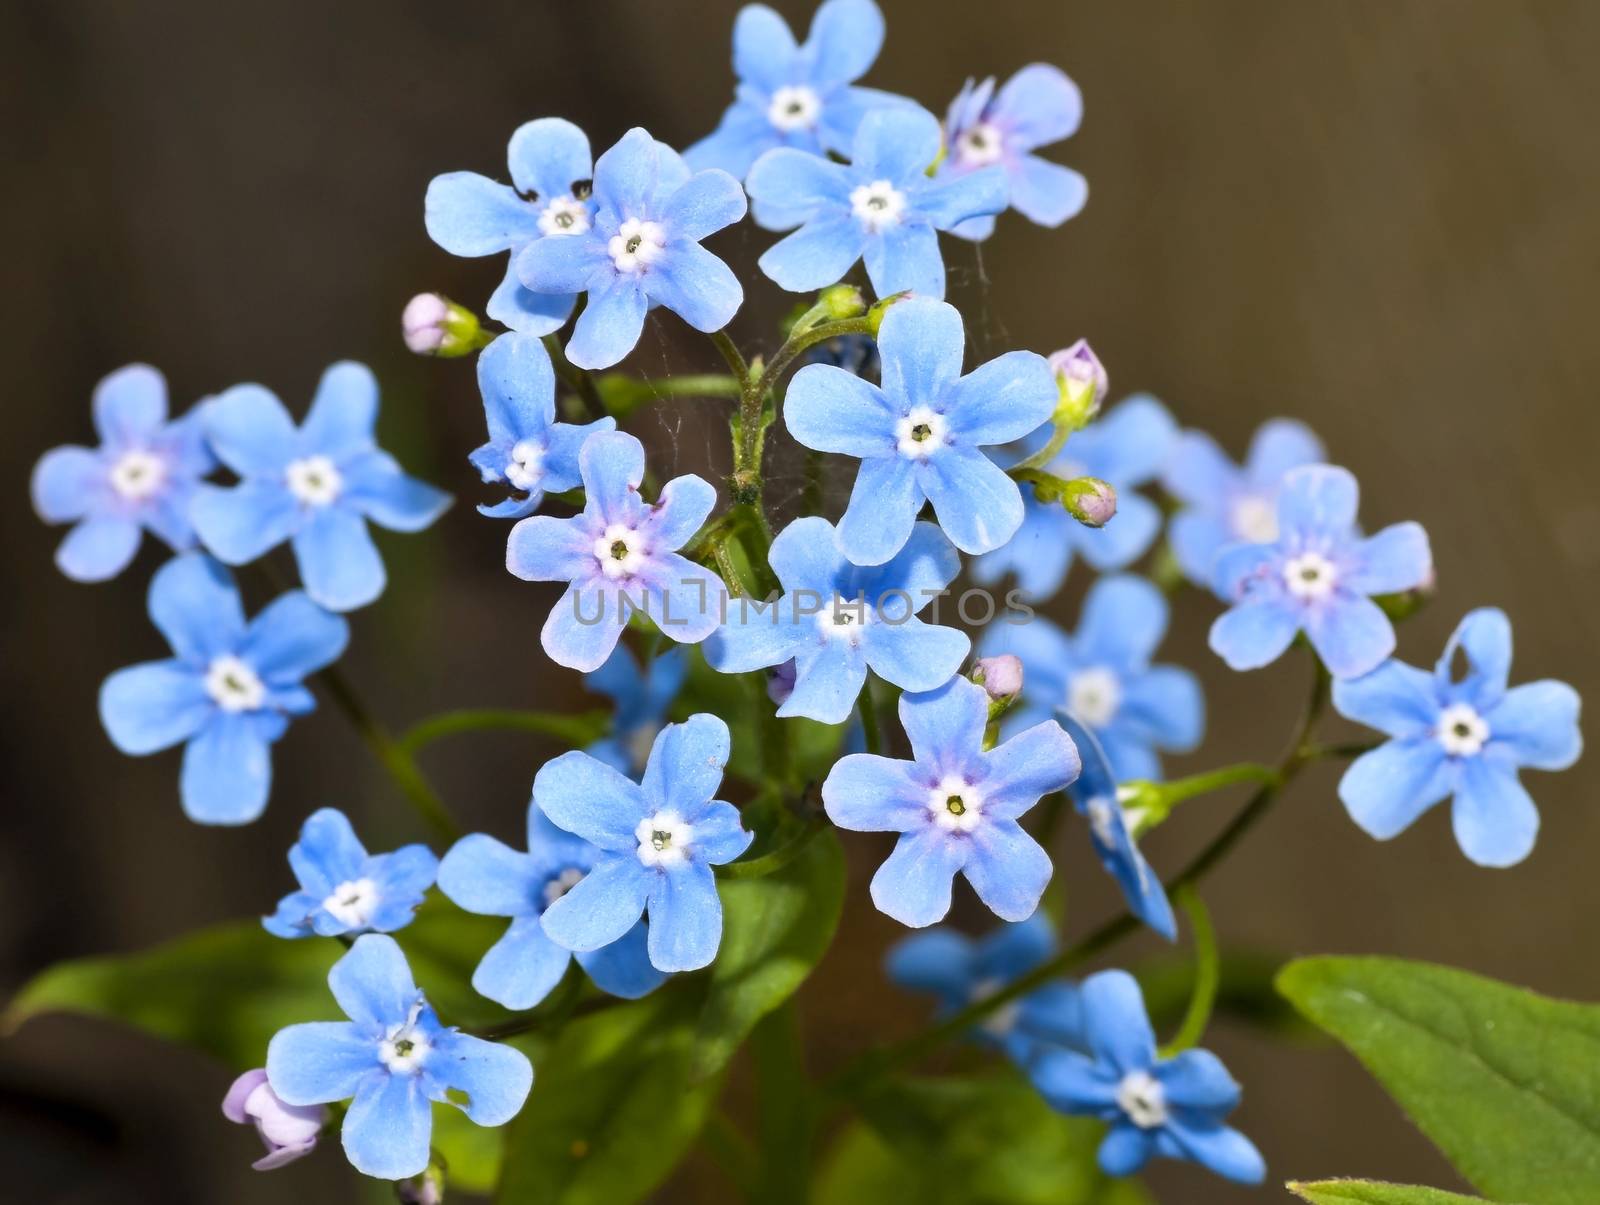 beautiful flowers forget-me-nots closeup in early morning